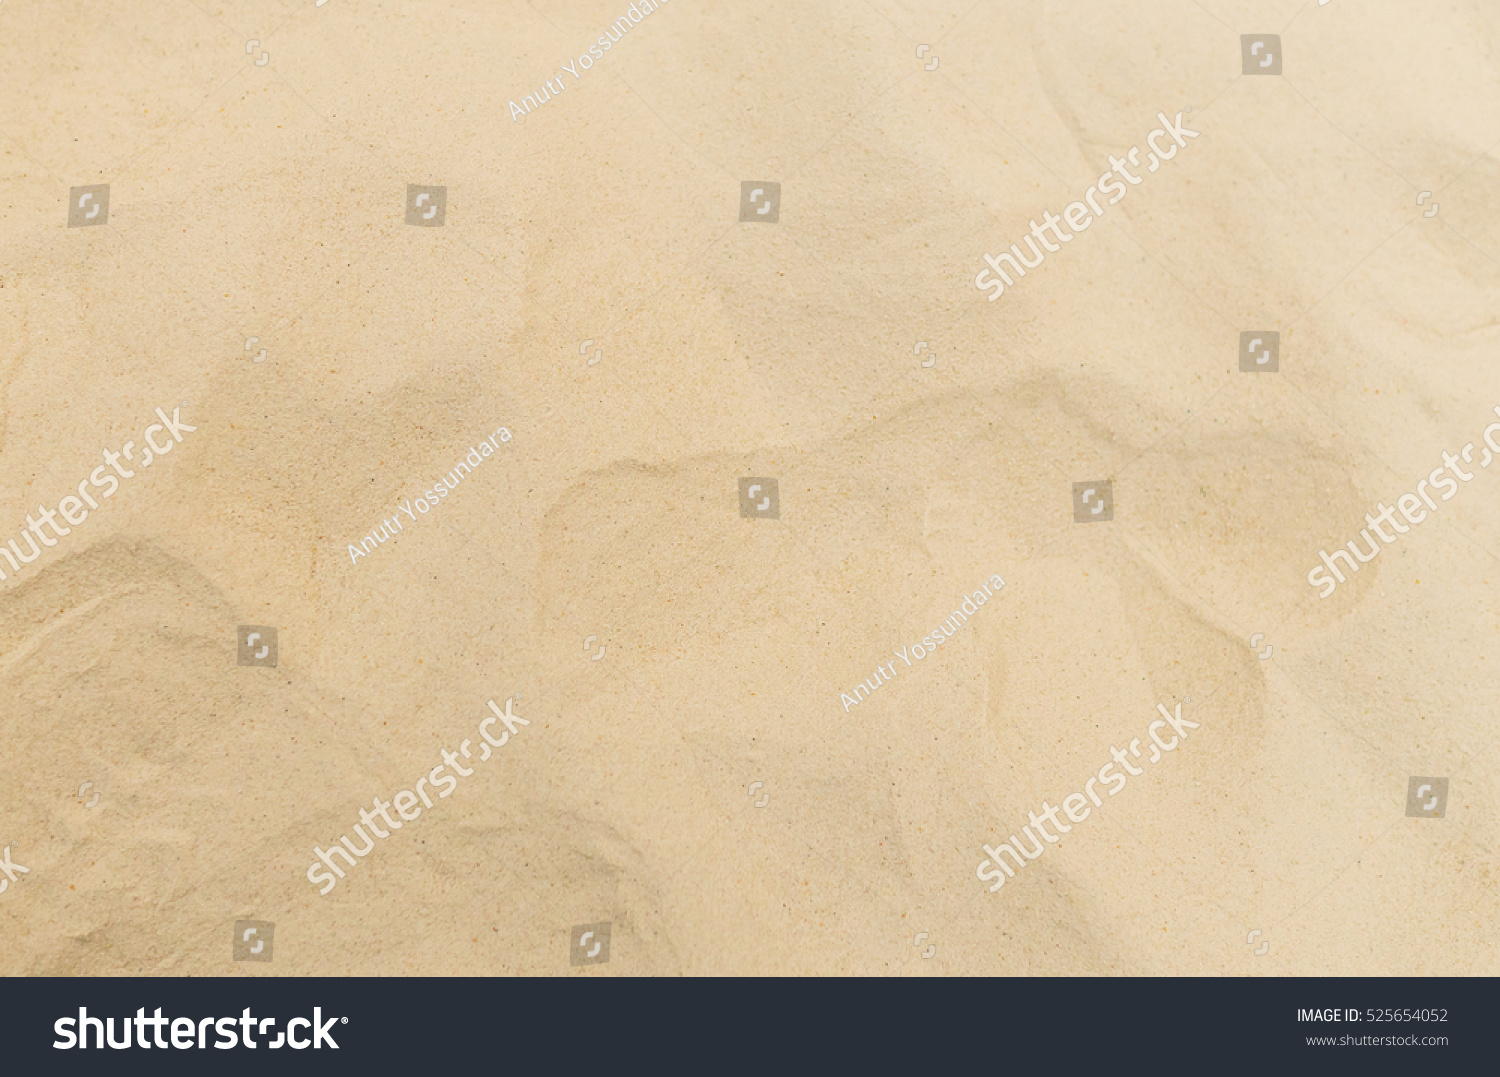 Clean fine sand Beach surface dune top view from children playground surface for texture and background backdrop design use. #525654052